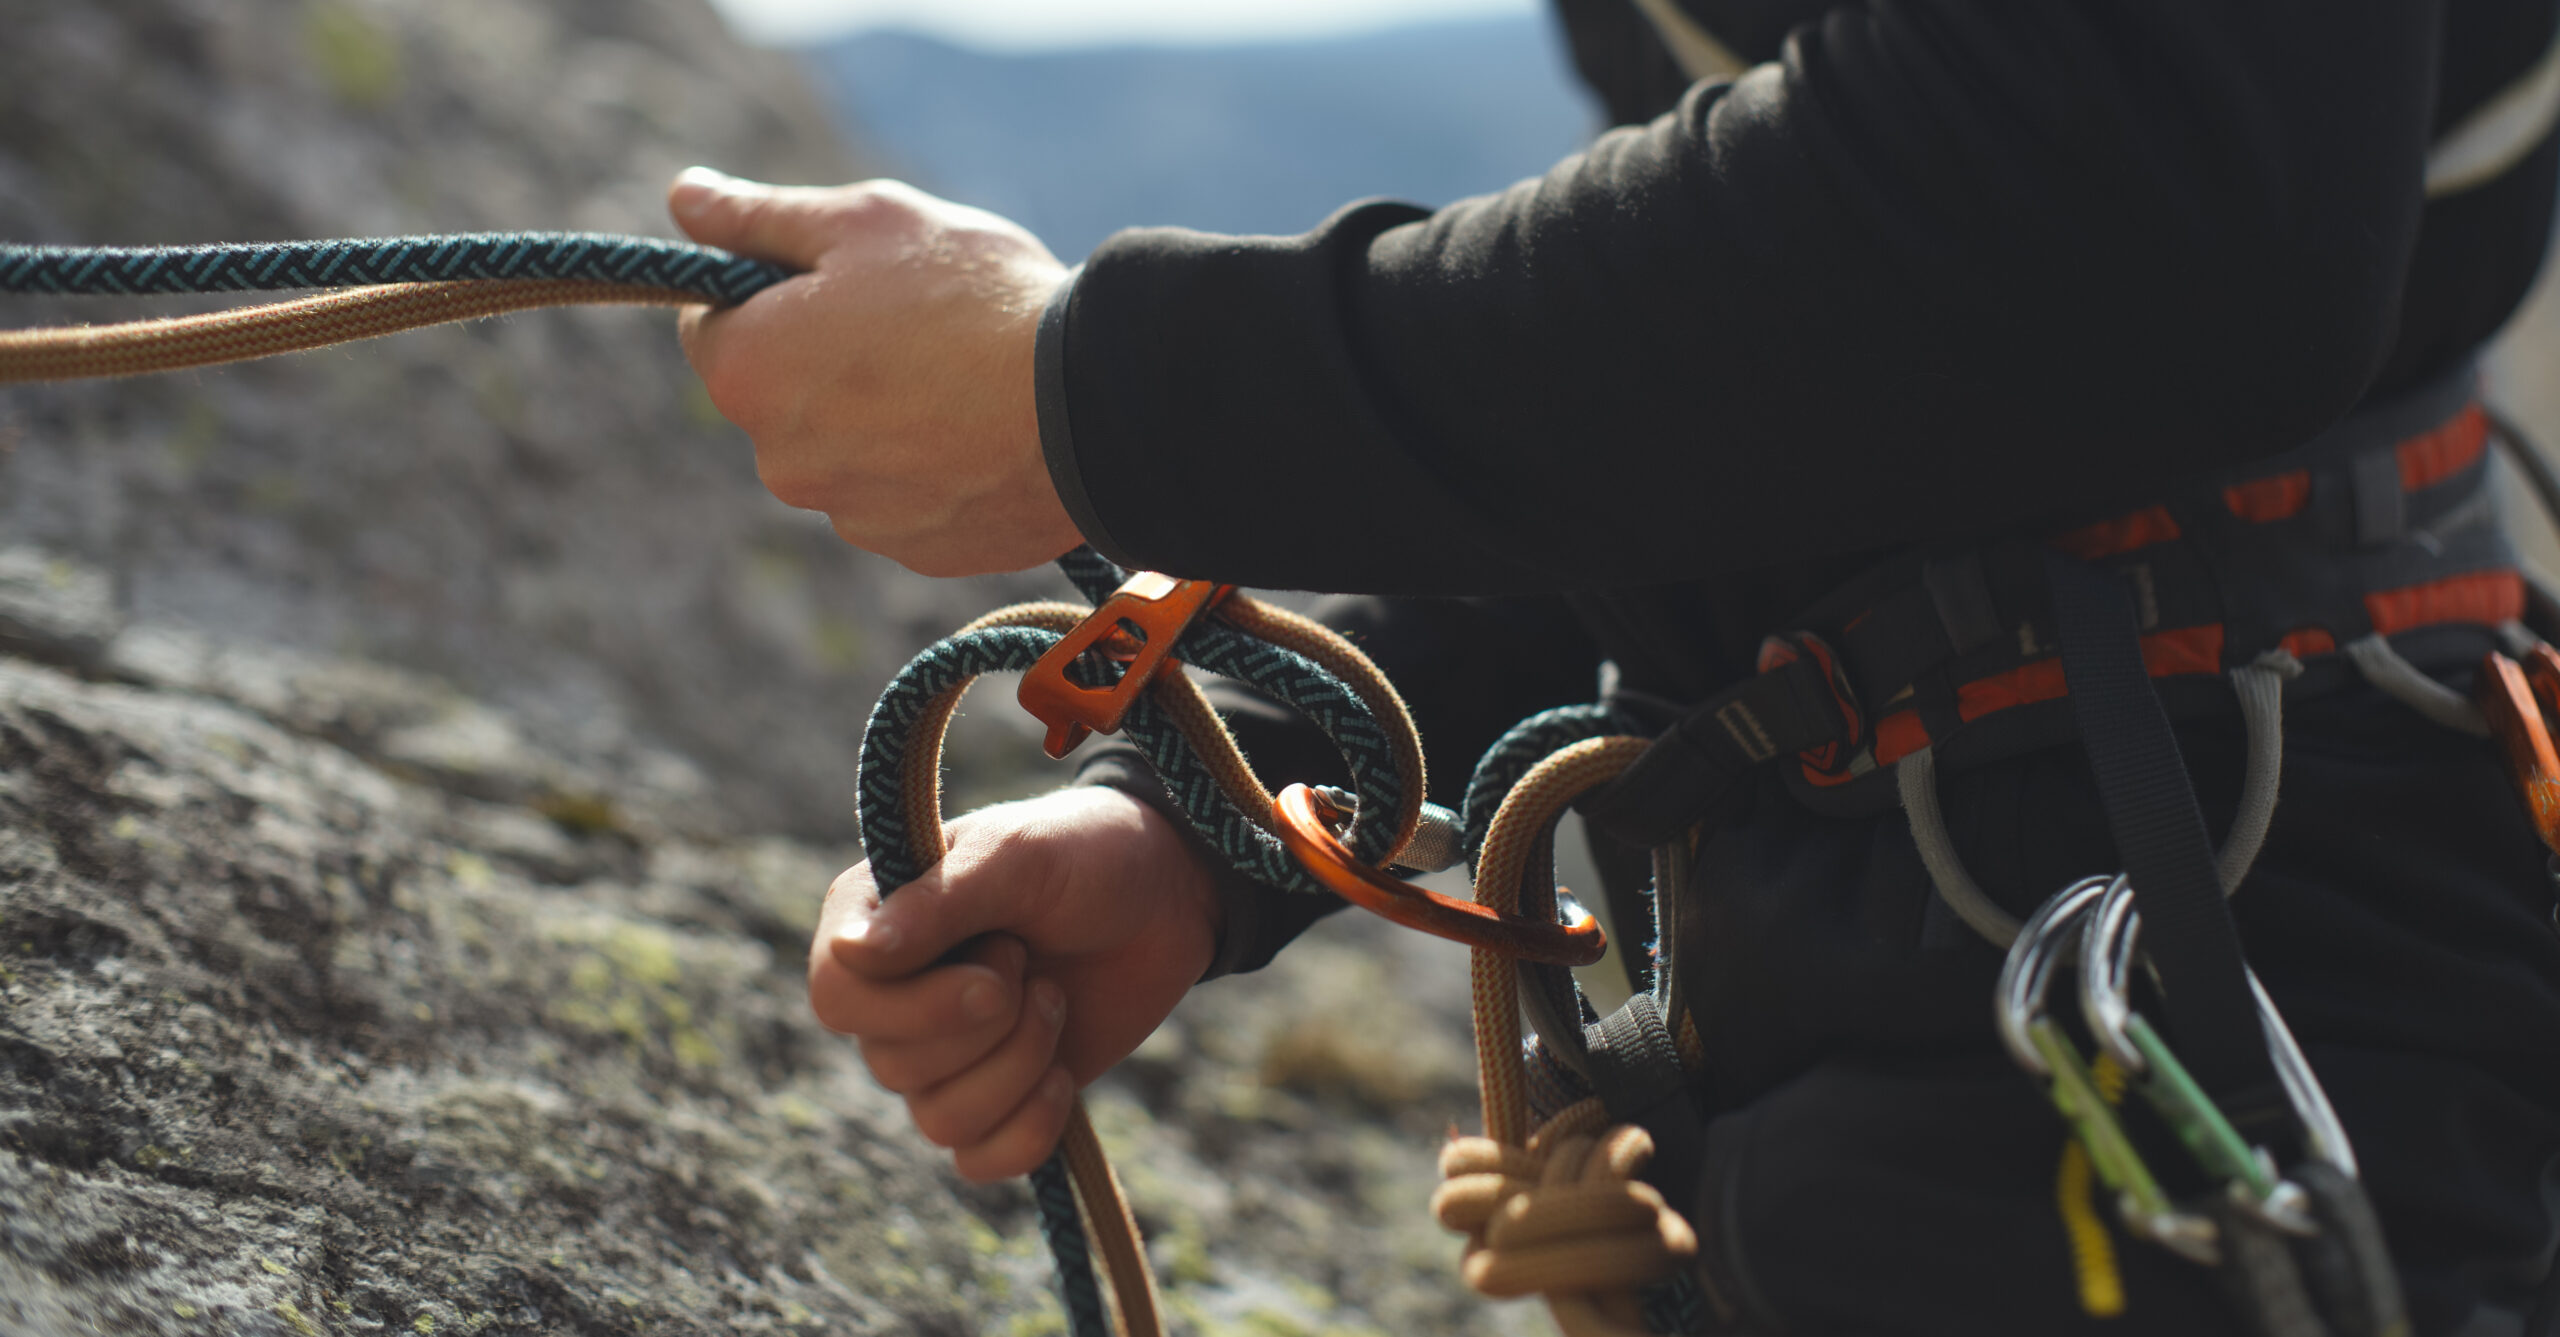 A person holding climbing ropes, and with several carabiners available to them